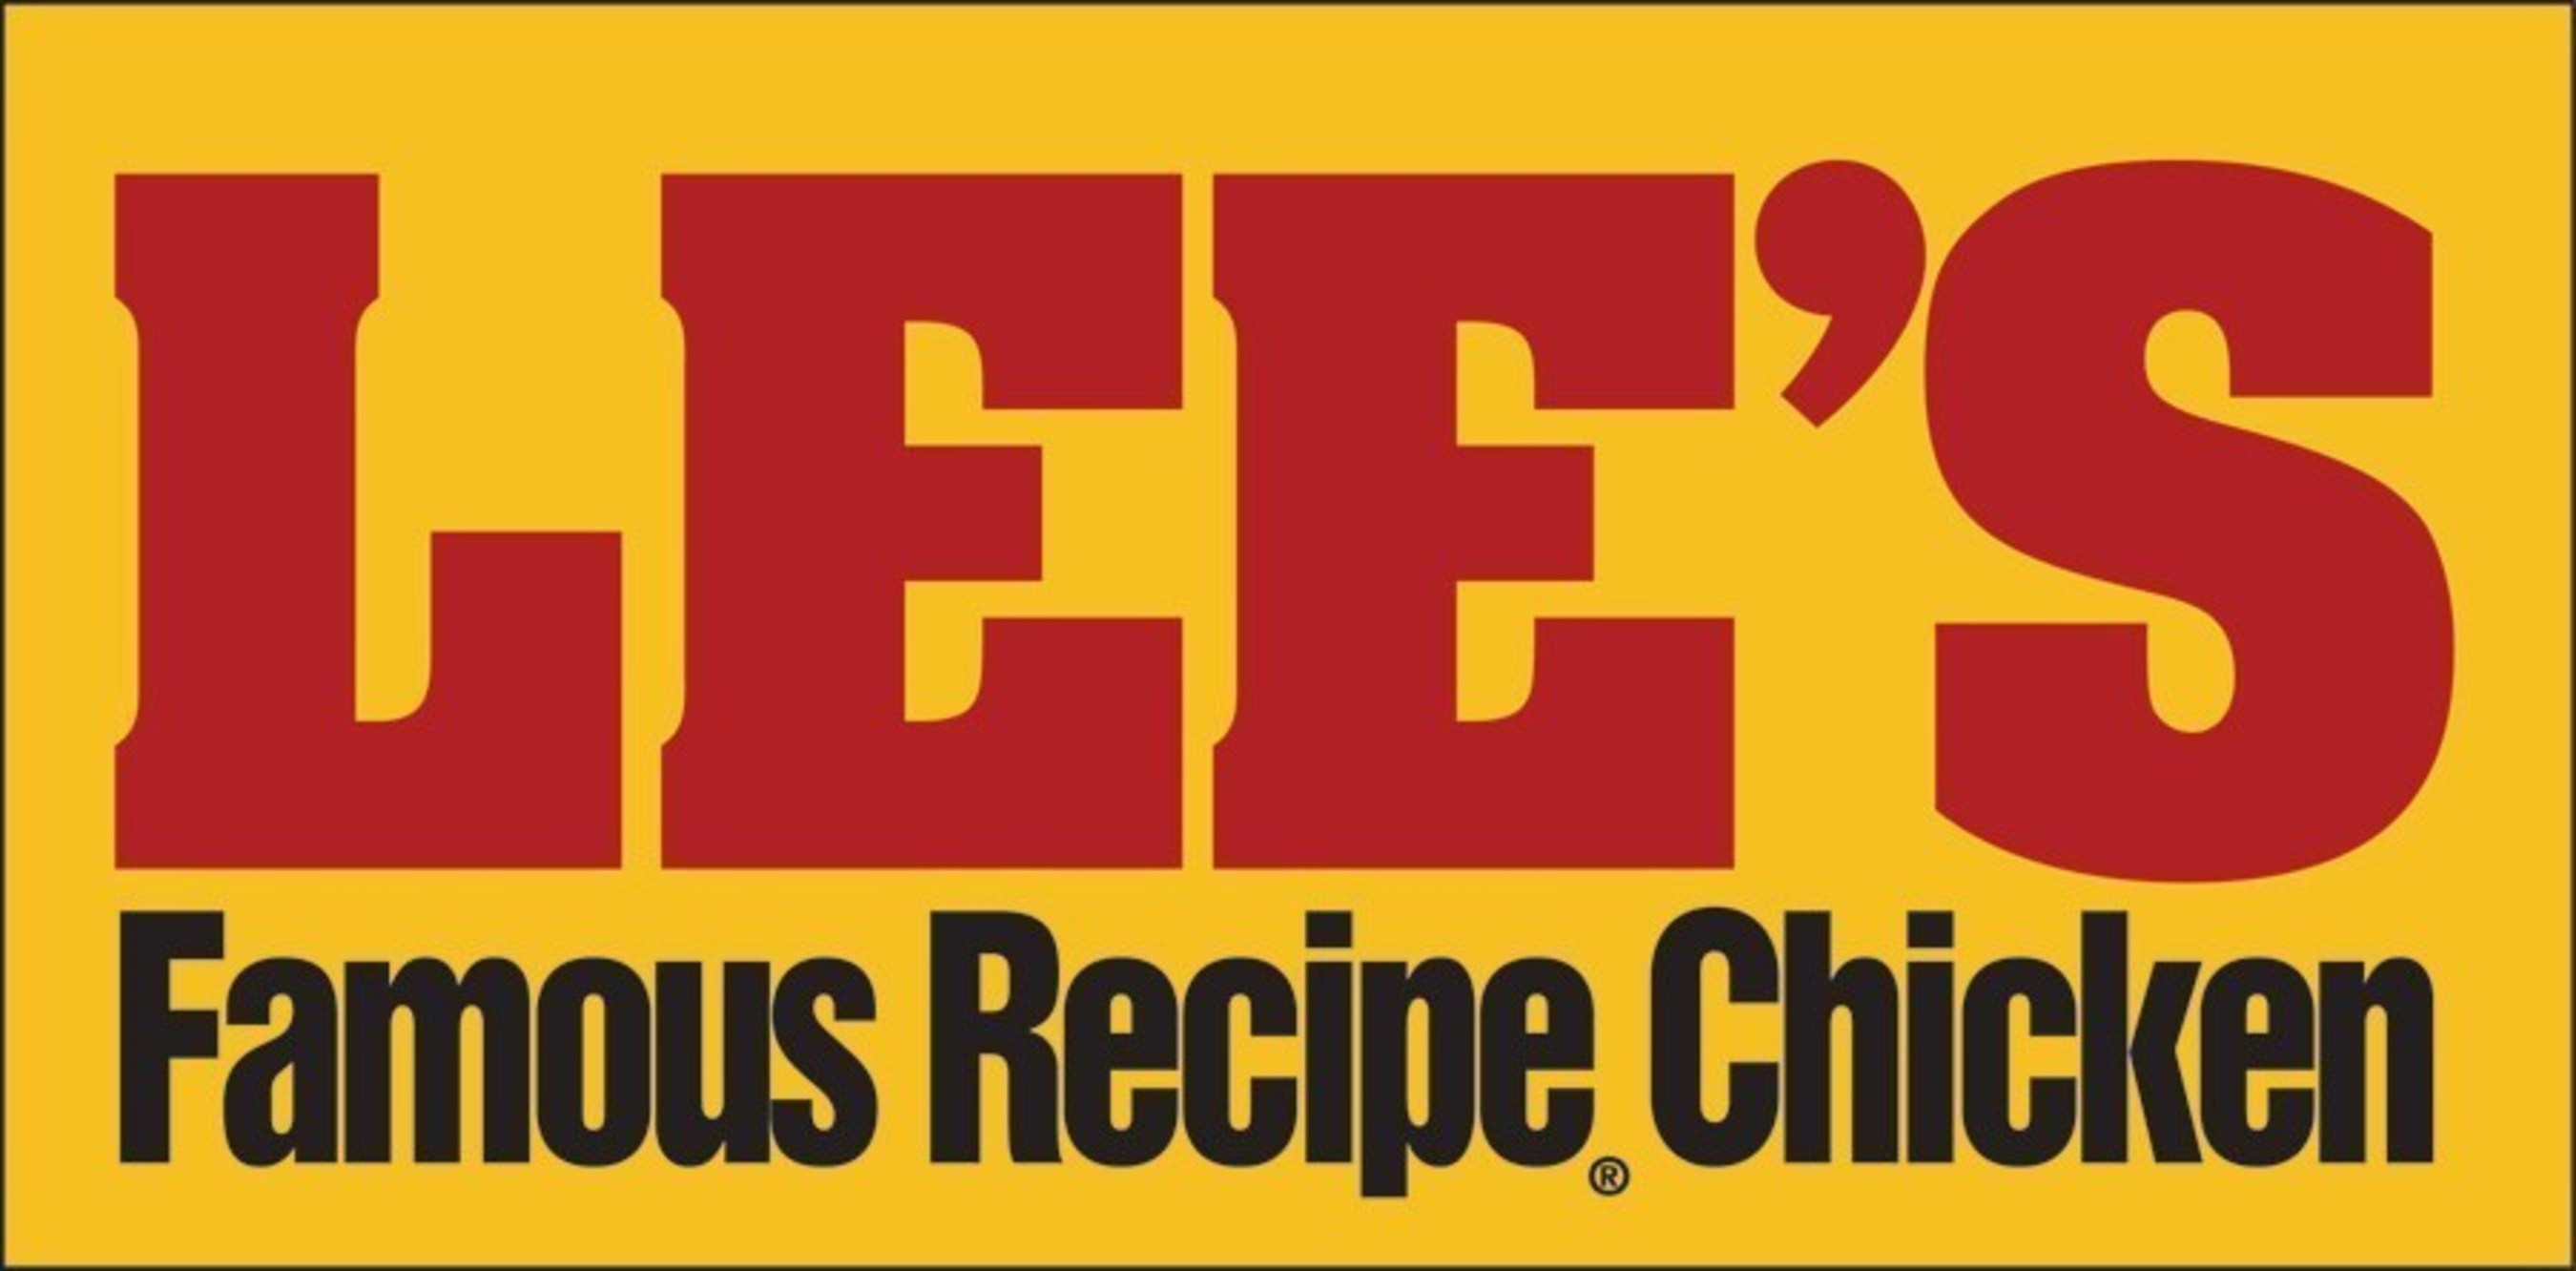 Celebrating 50 years of success, Lee's Famous Recipe® Chicken rewards  customers with social media giveaways and memorabilia